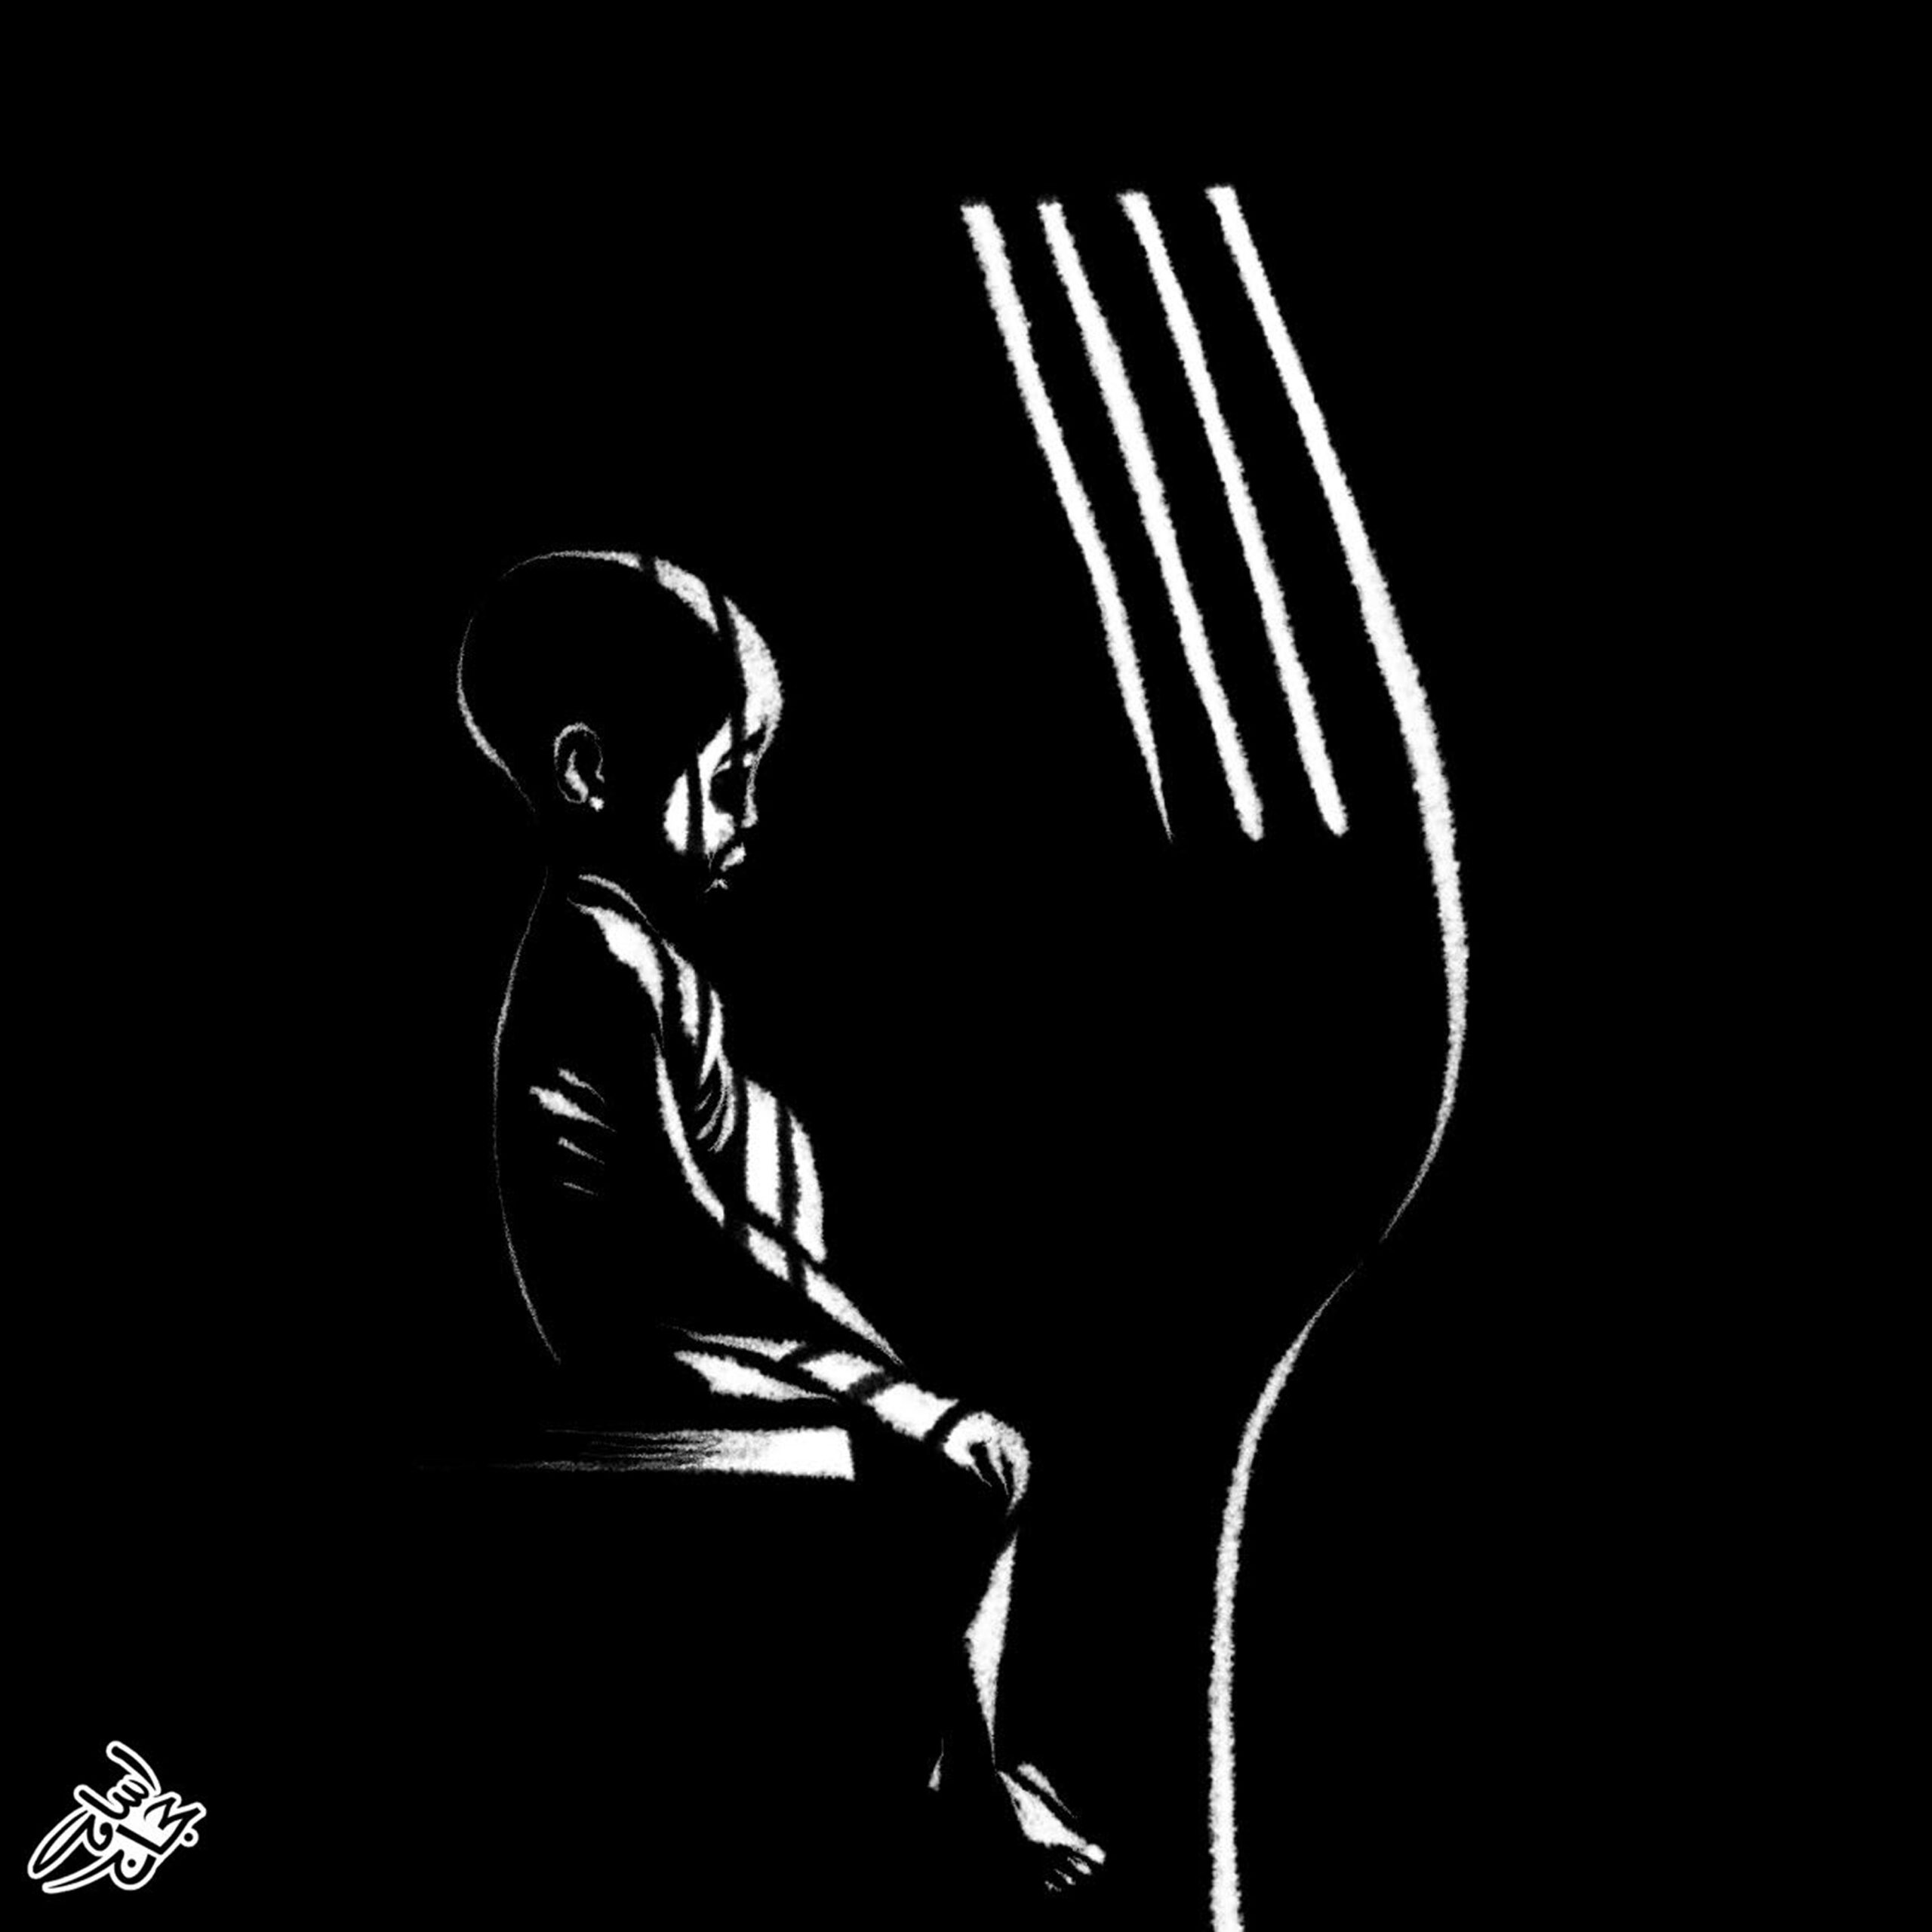 Black and white drawing of a child and a fork, as prison bars.